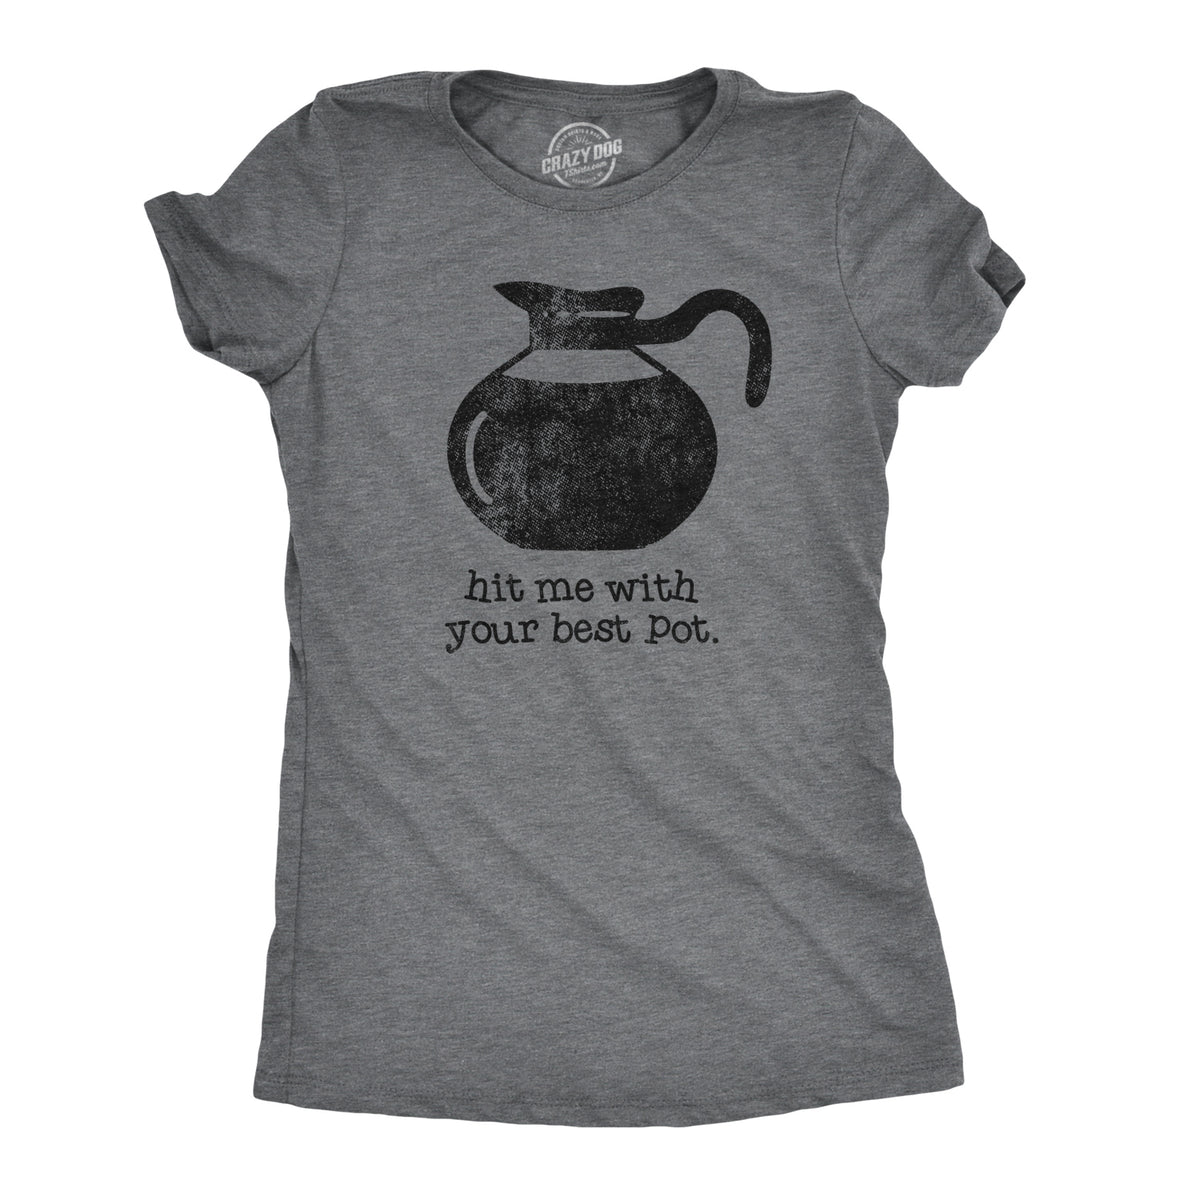 Funny Dark Heather Grey - Best Pot Hit Me With Your Best Pot Womens T Shirt Nerdy Coffee Tee